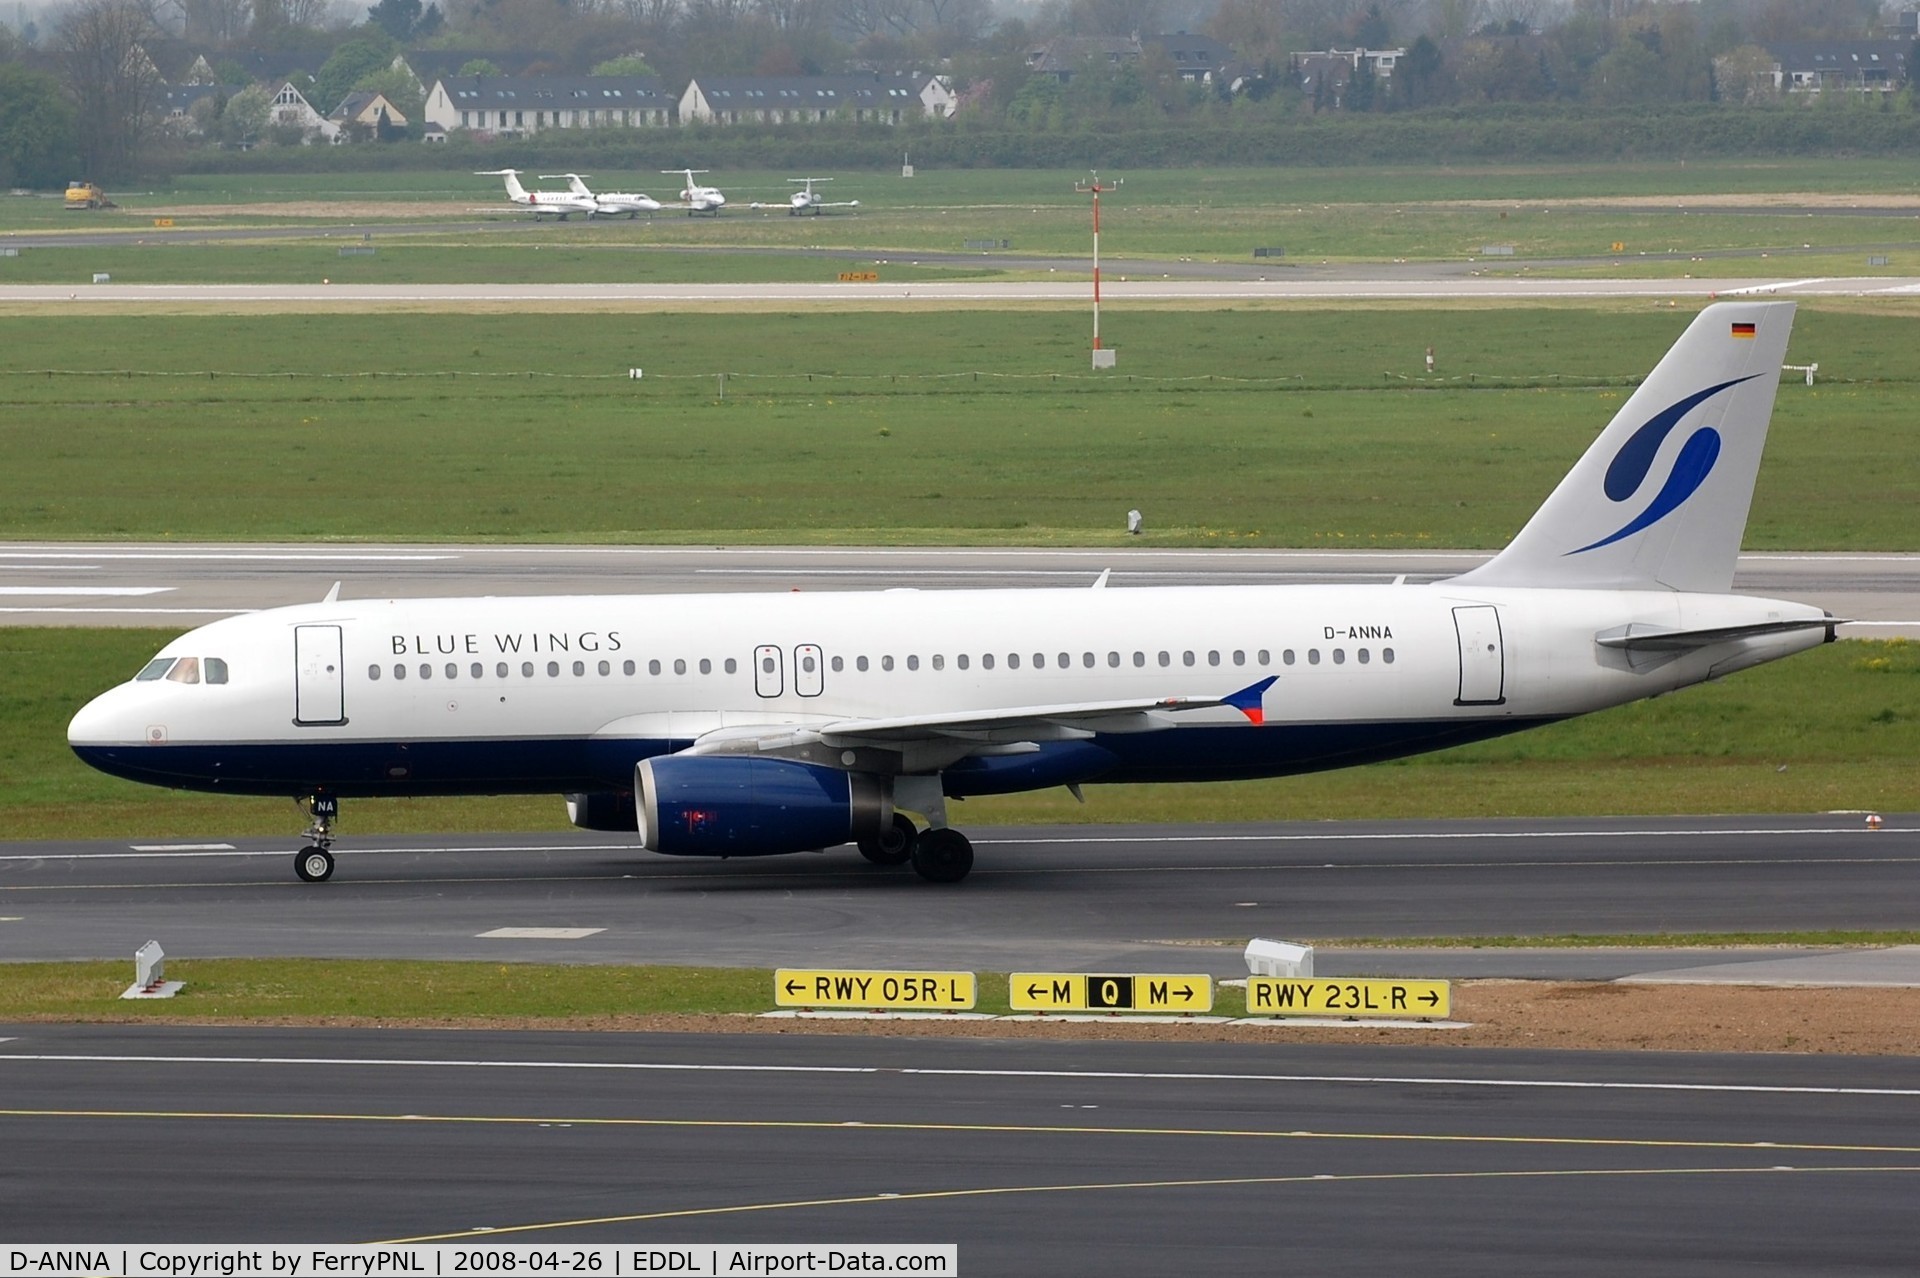 D-ANNA, 1996 Airbus A320-233 C/N 916, Blue Wings A320, aircraft now with Onur Air as TC-OBG